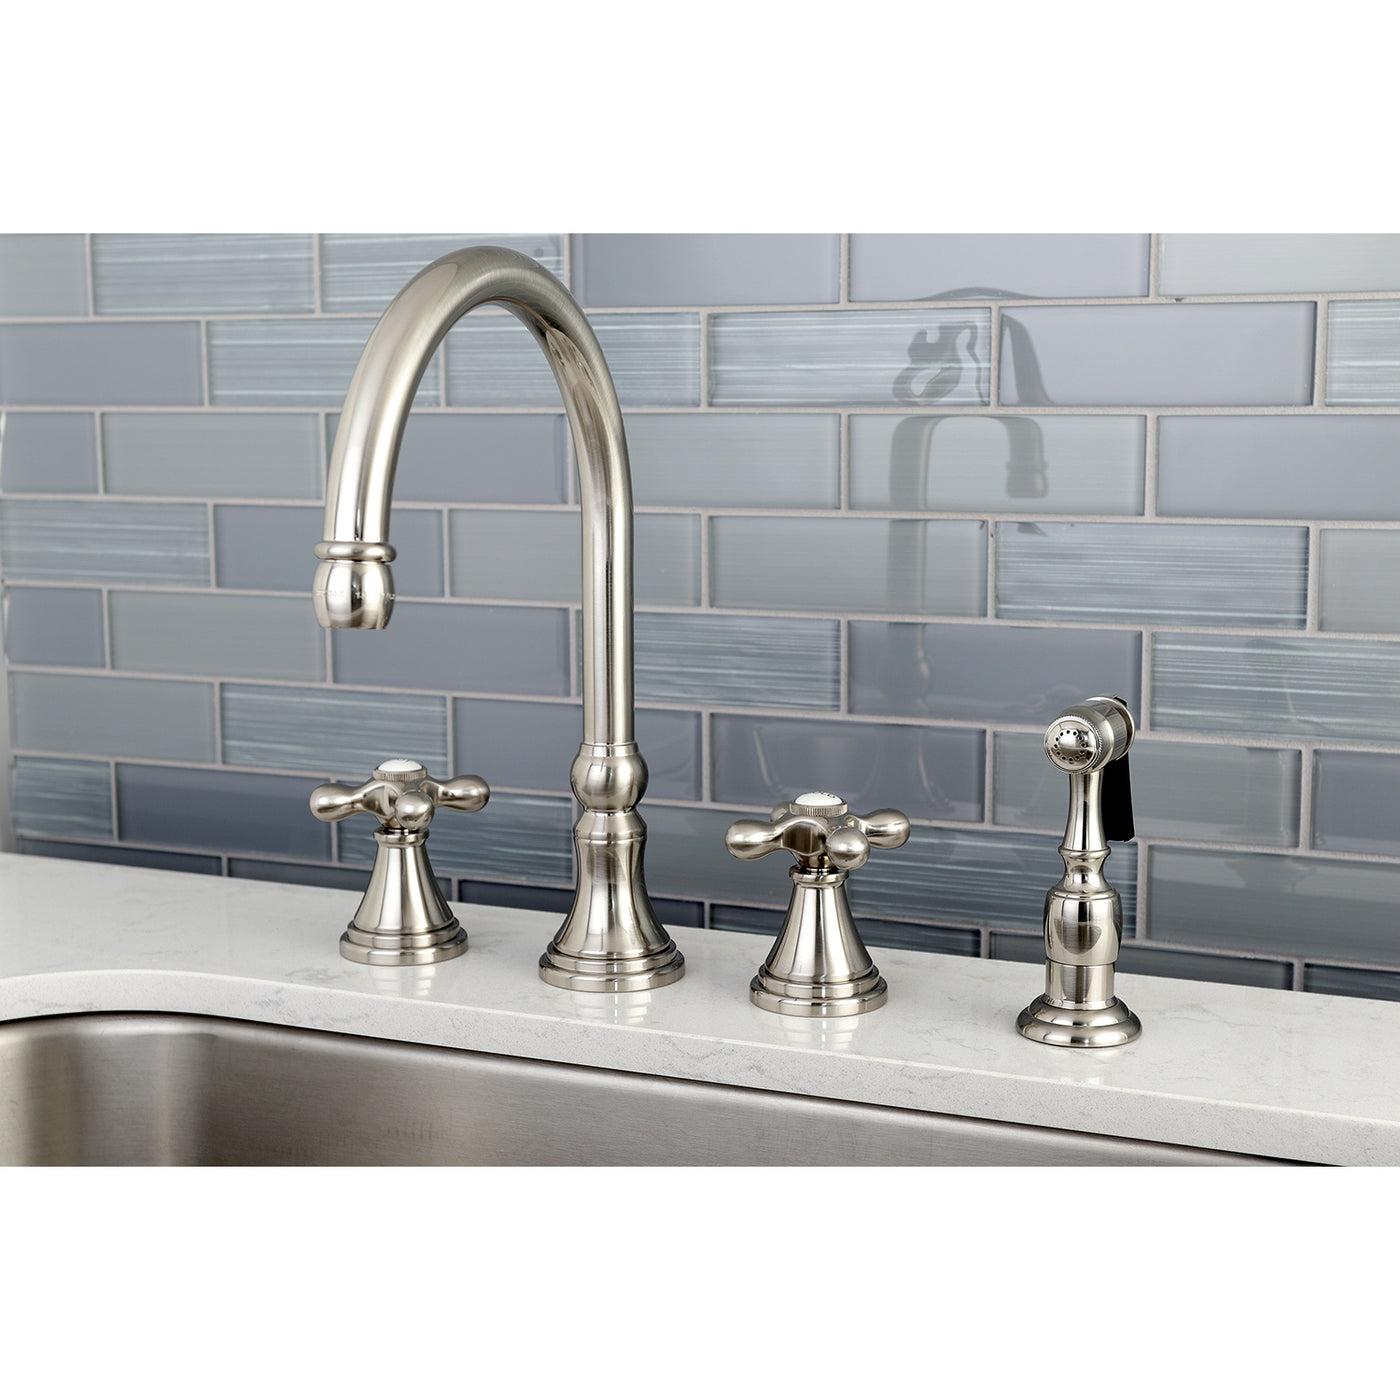 Elements of Design ES2798AXBS Widespread Kitchen Faucet with Brass Sprayer, Brushed Nickel